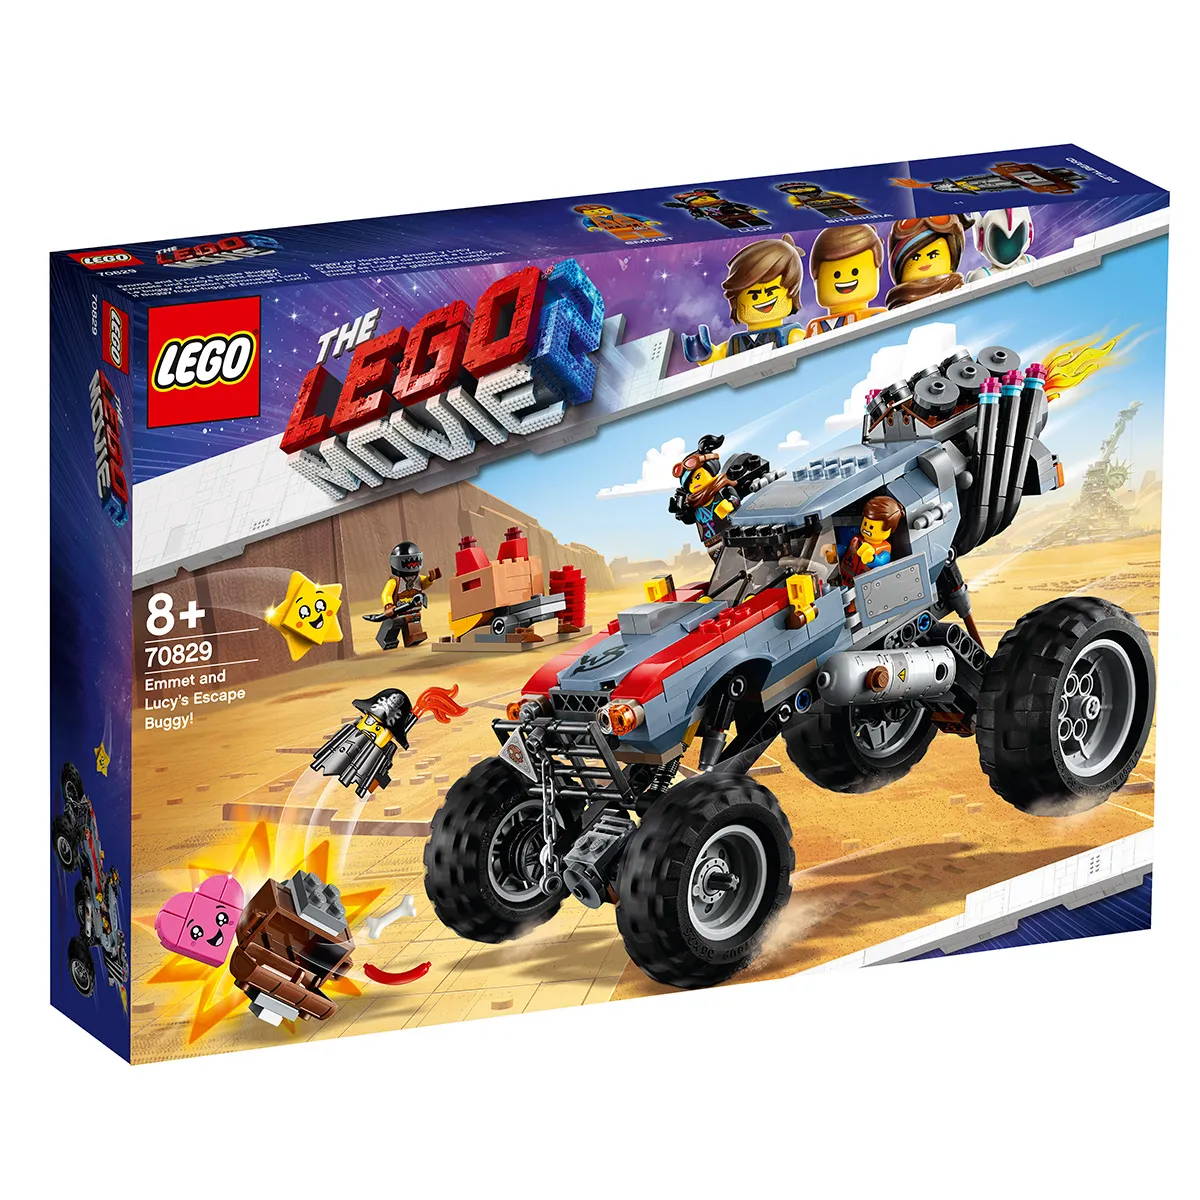 The LEGO Movie 2 Building Sets